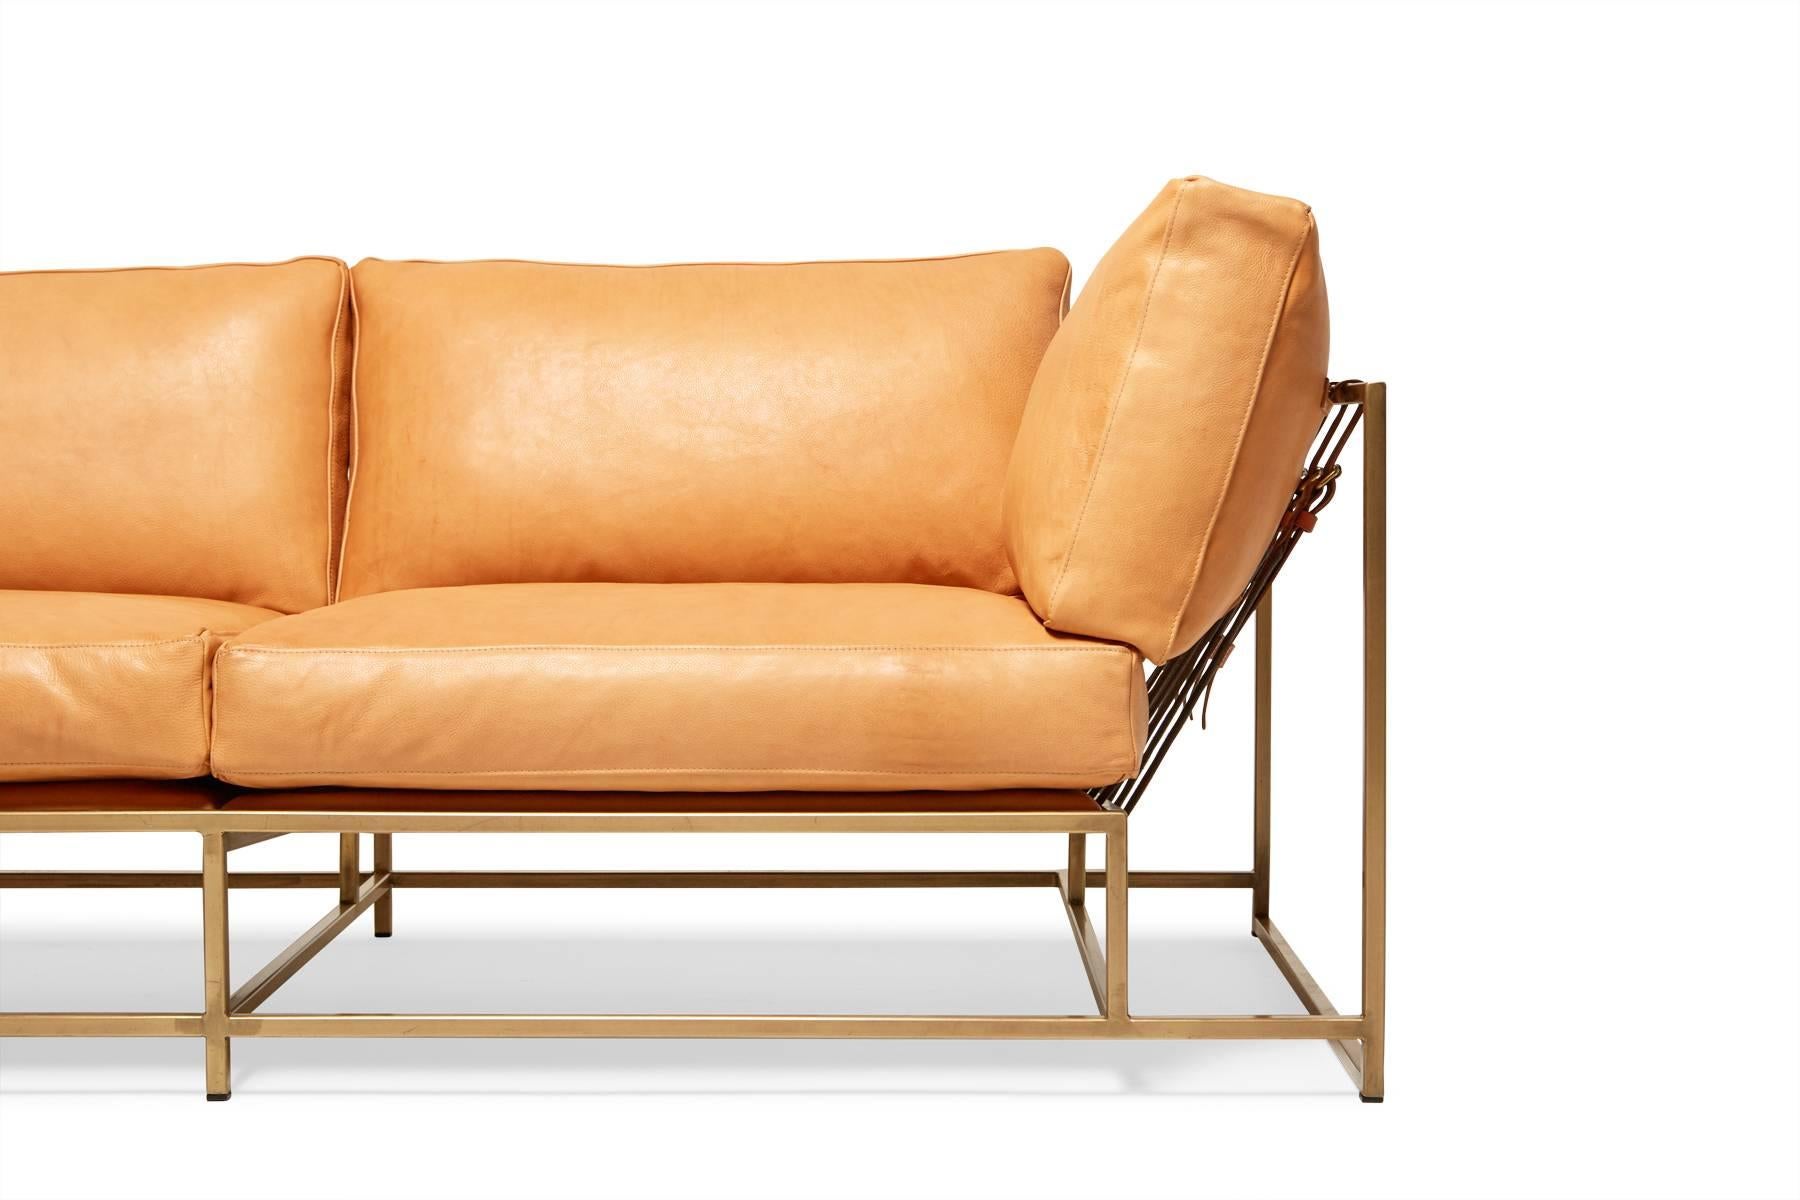 Metalwork Natural Leather and Antique Brass Two Seat Sofa For Sale